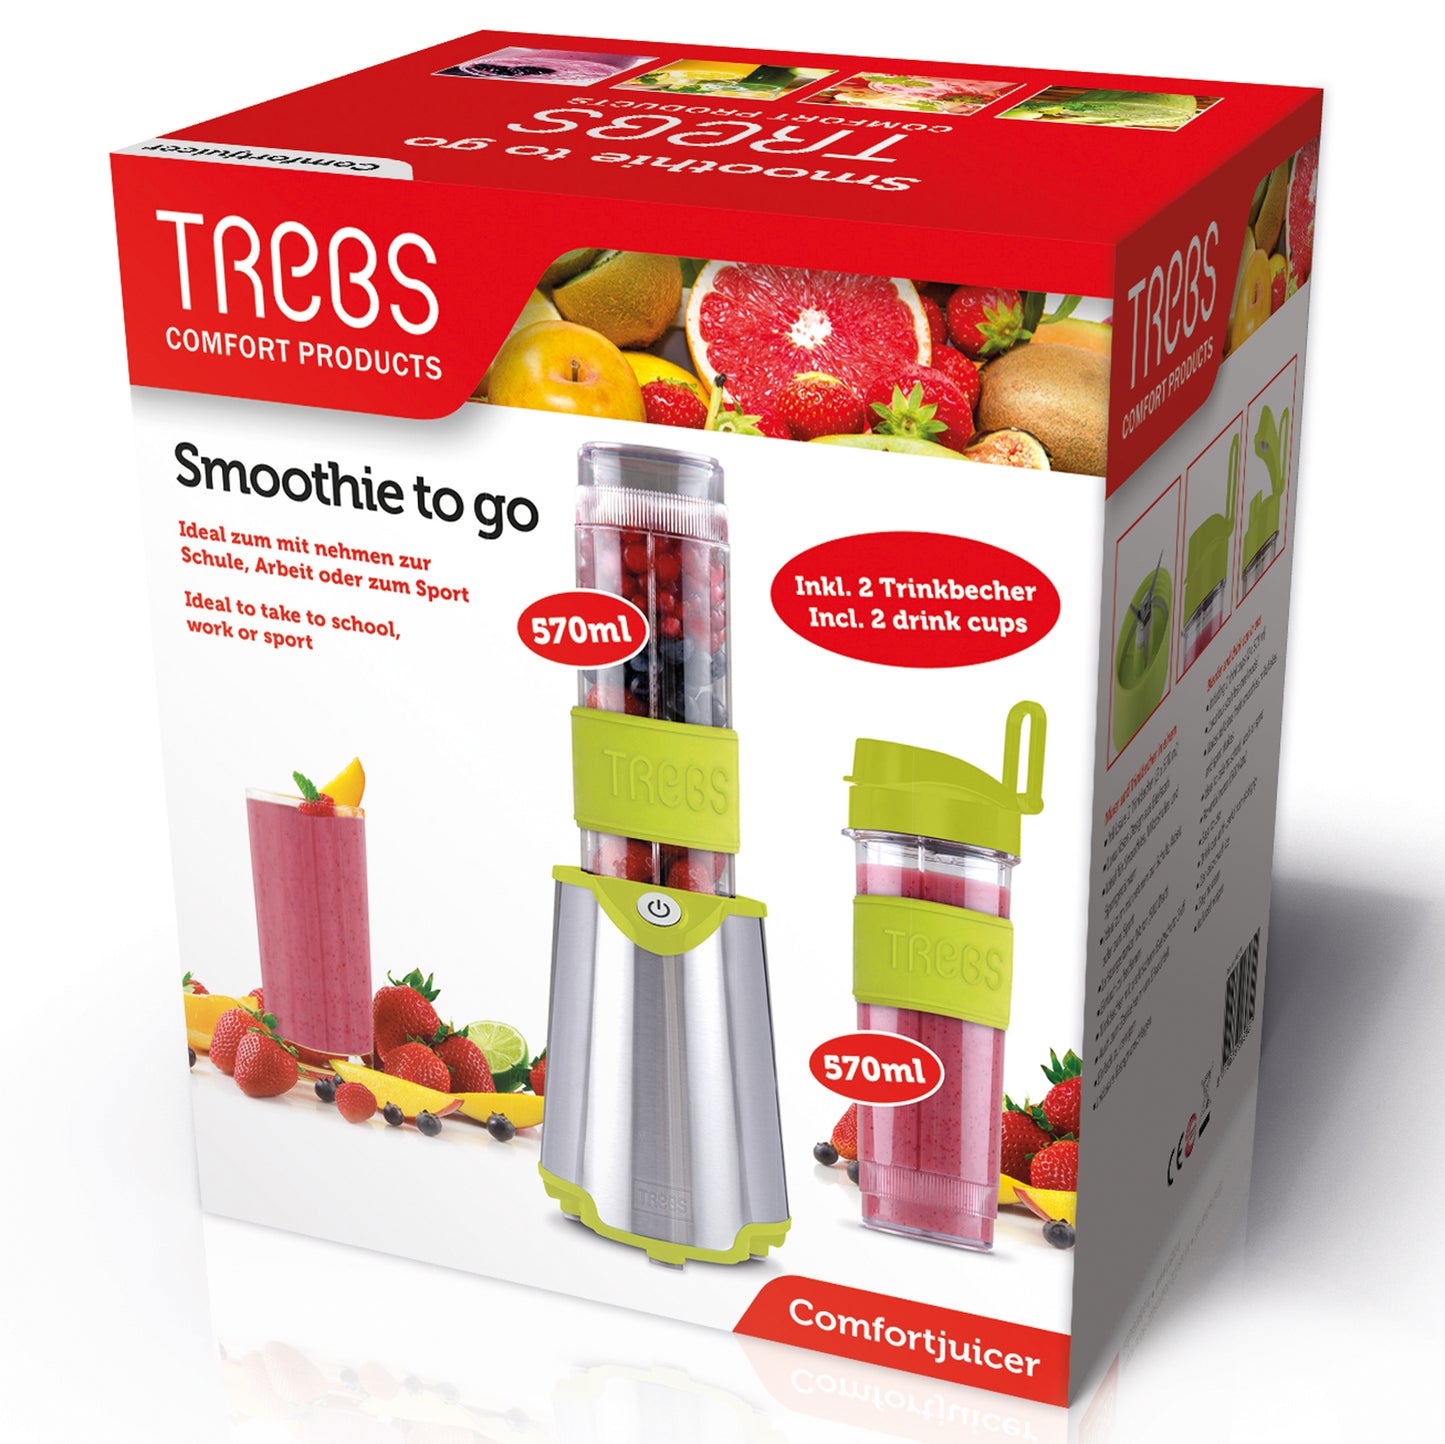 Trebs 99331 - Smoothie-to-go - Stainless steel - Comfortjuicer for smoothies, juices and sports drinks